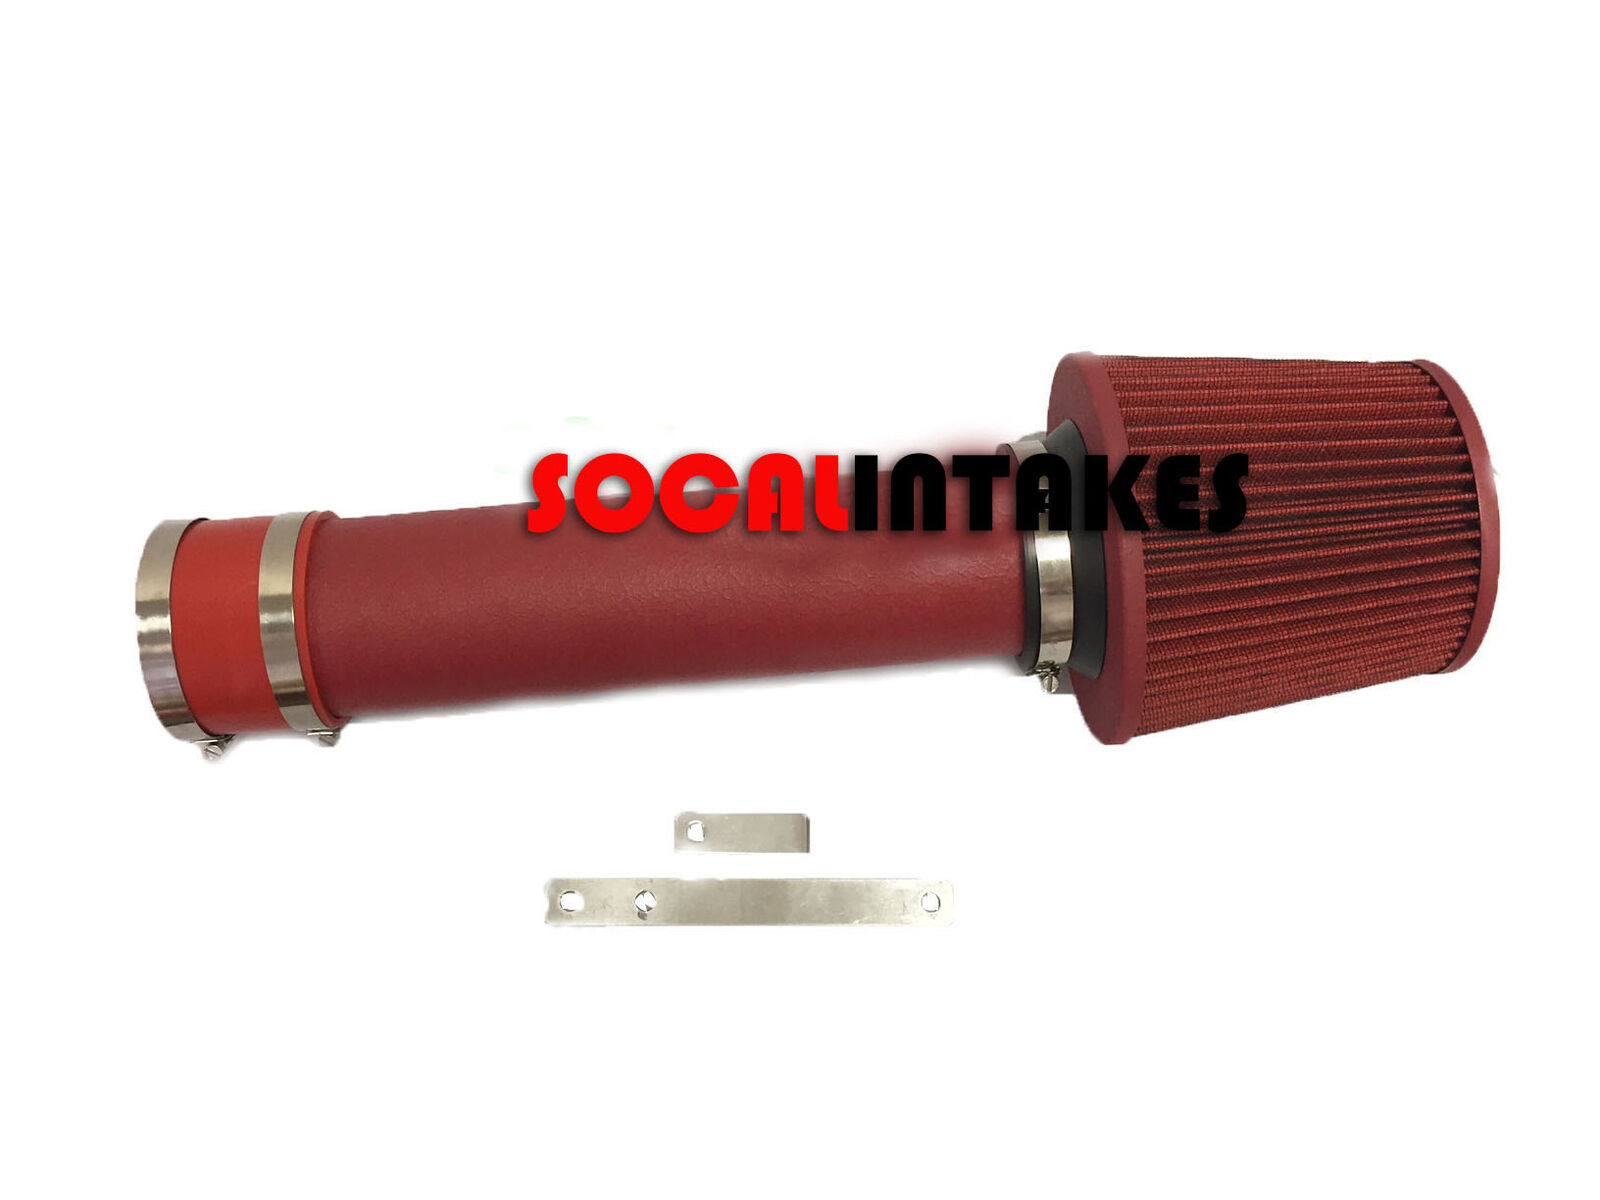 RED COATED Air Intake kit For 94-96 Chevy impala Fleetwood Roadmaster 4.3 5.7